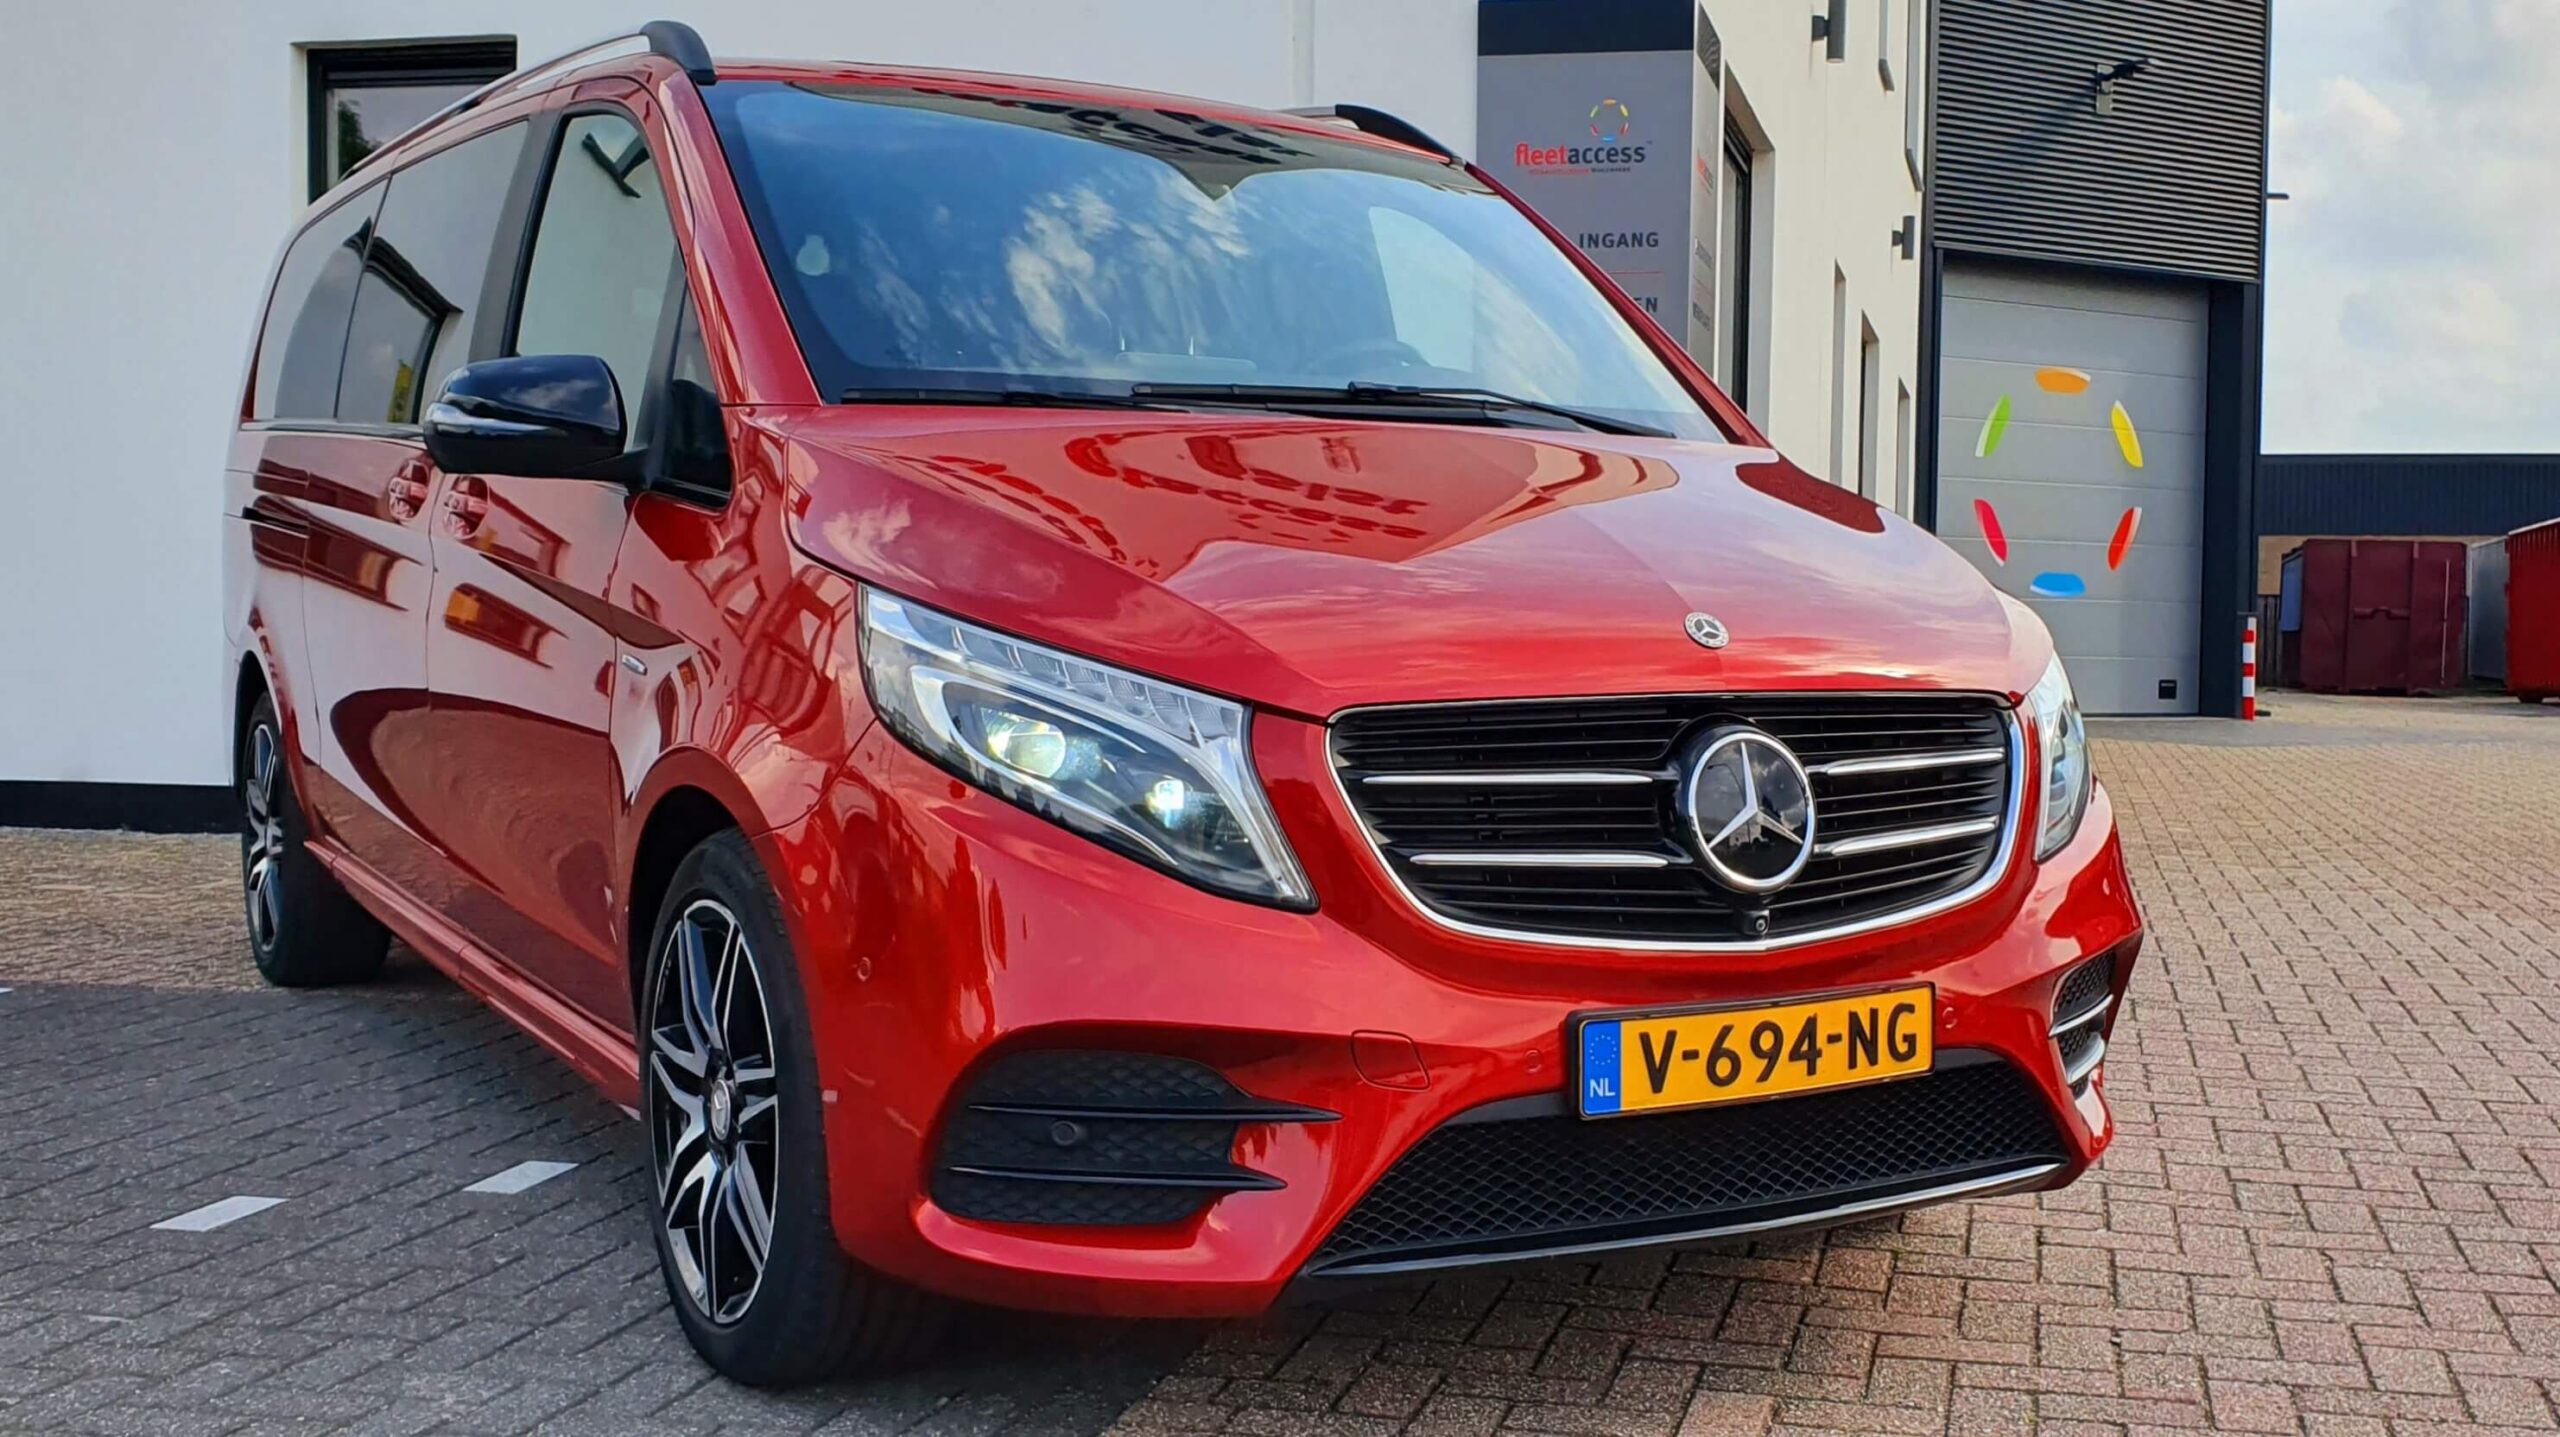 A red Mercedes-Benz V-Class parked in front of the entry of the building of Fleetaccess B.V. Alarm systems in Nuenen, the Netherlands